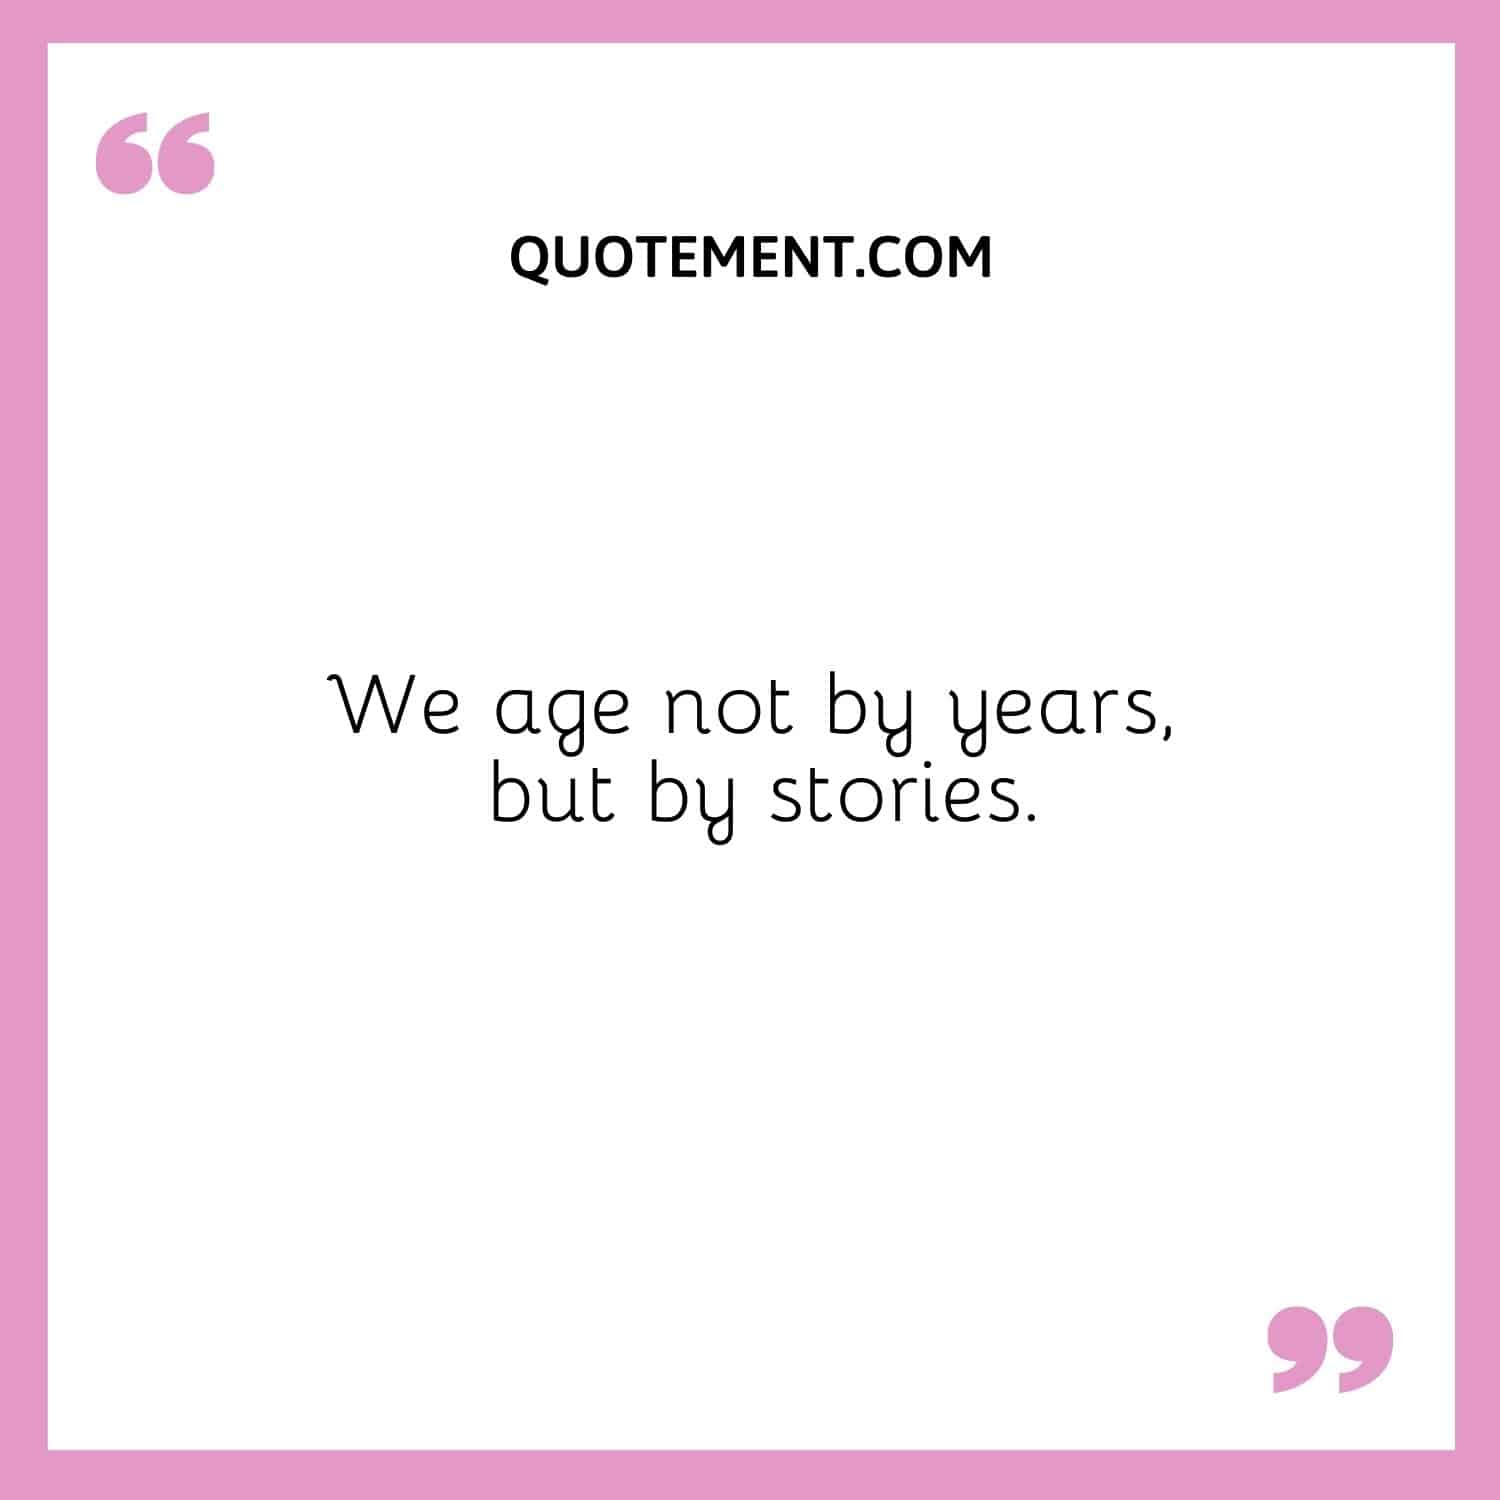 We age not by years, but by stories